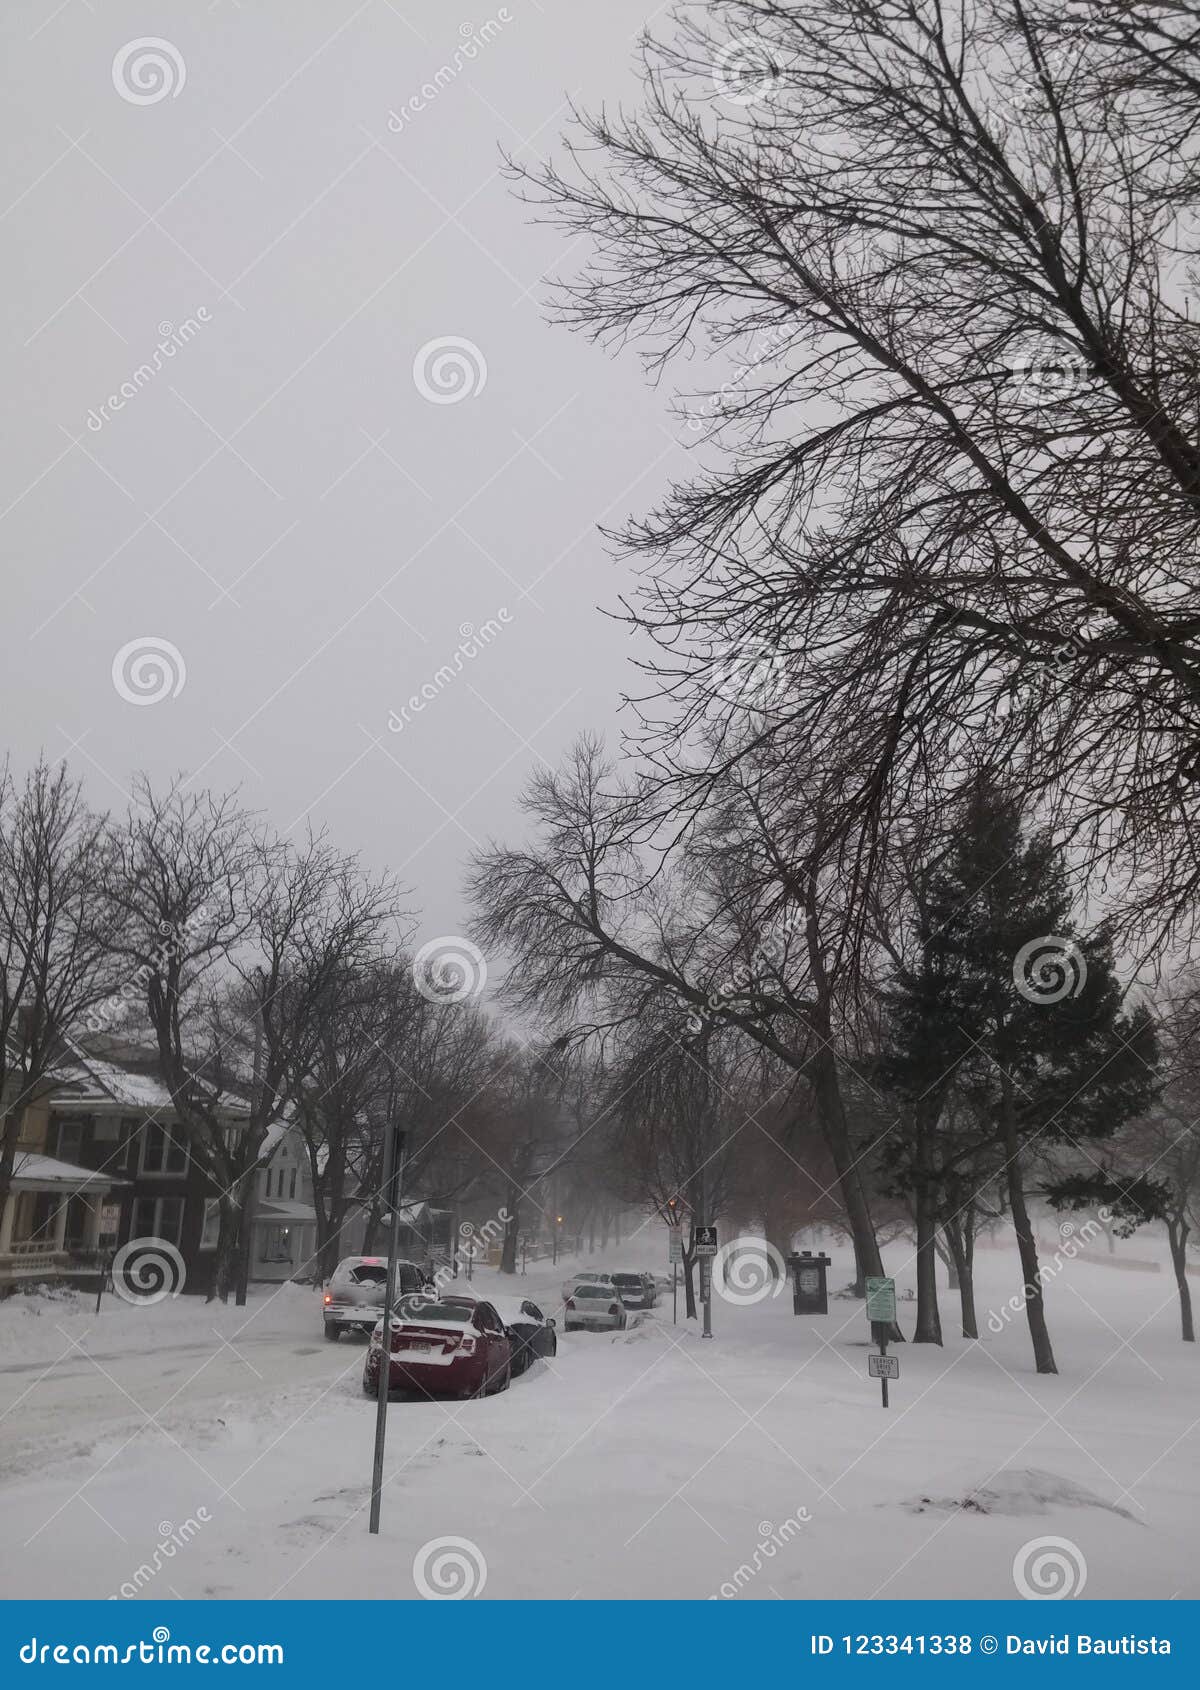 Street Road with Cars, Trees and Neighborhood Houses, Covered Under ...